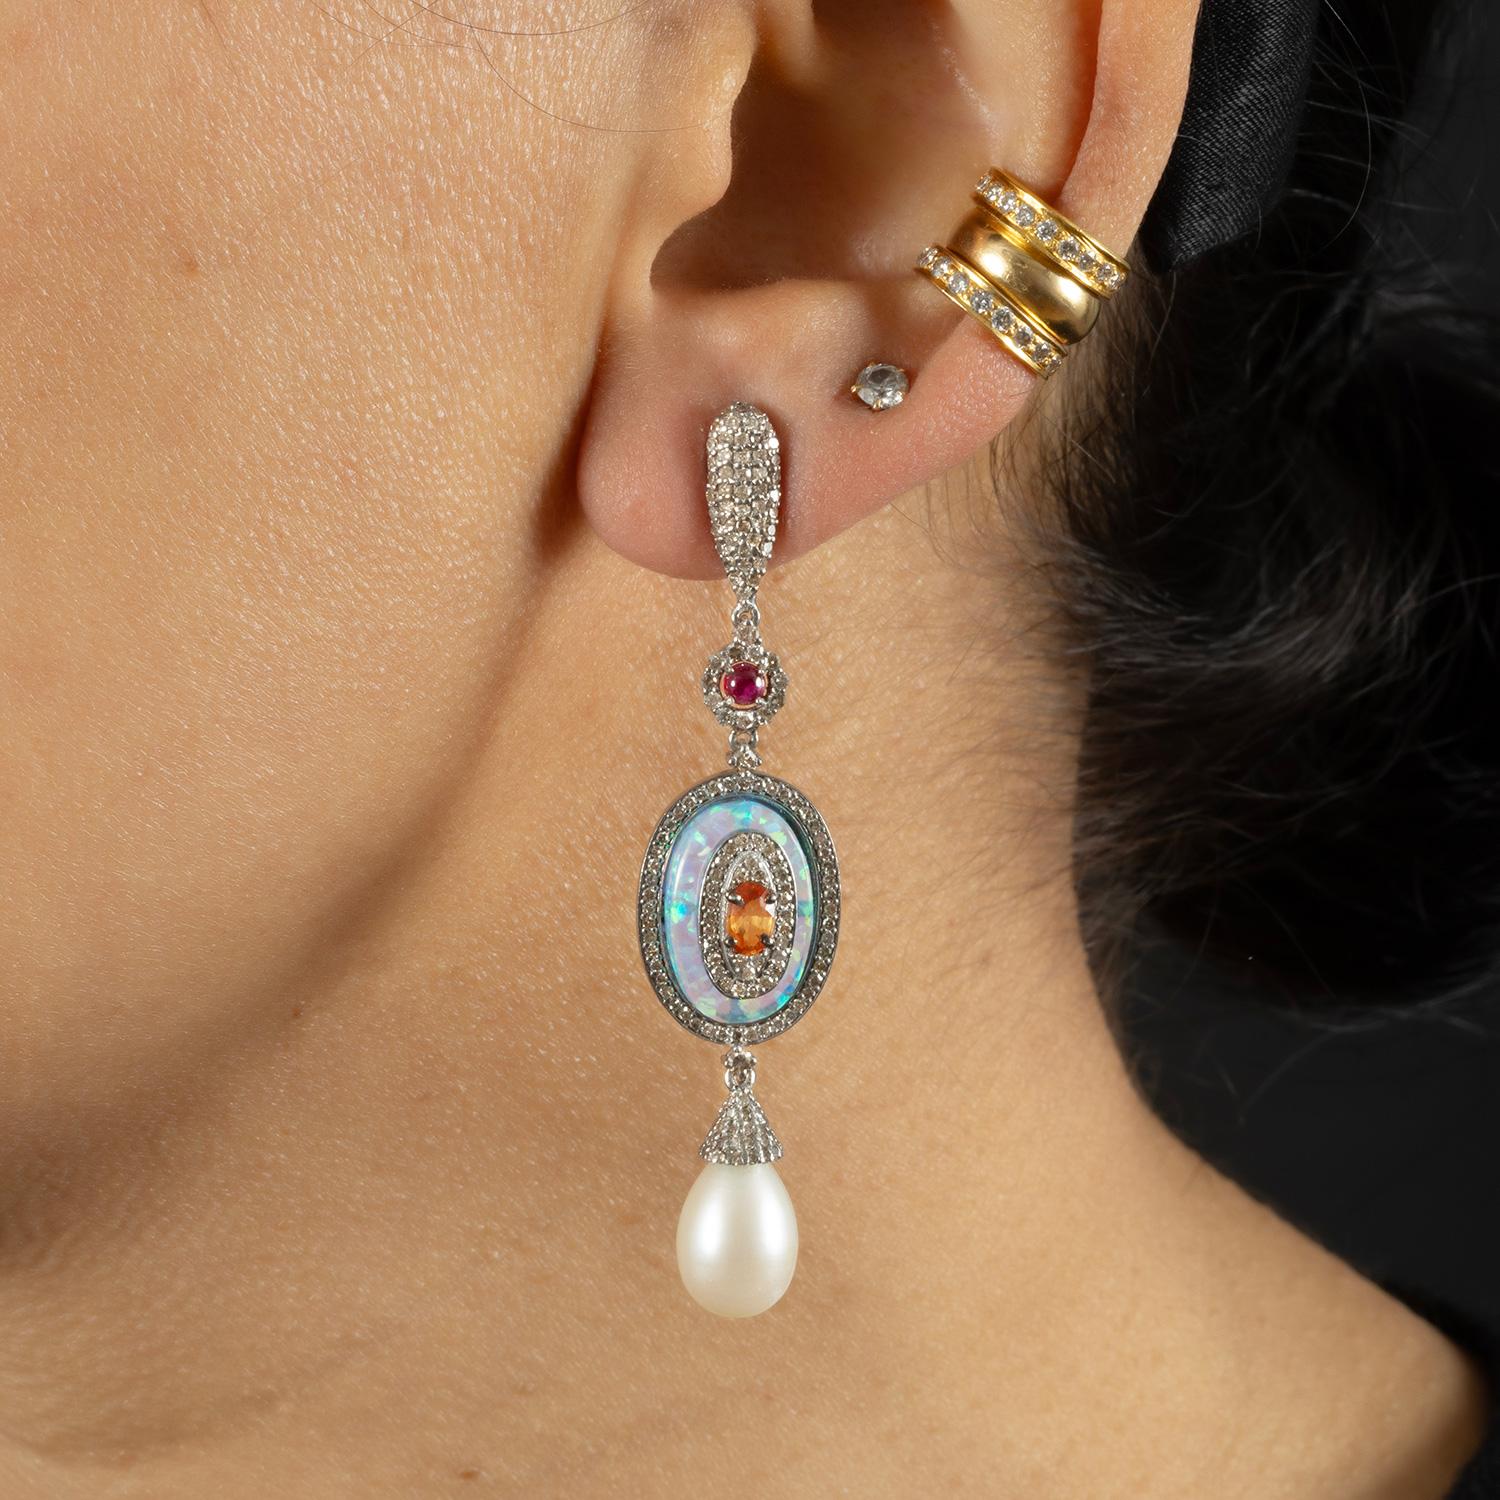 An interesting combination of consciously sourced stones, consciously hand crafted, giving the earring a beautiful colour pop.

Single cut diamonds; (3.30 carat); Opal (11.35 carat); Pearl (0.60 carat); Coloured Tourmaline & Sapphire (1.50